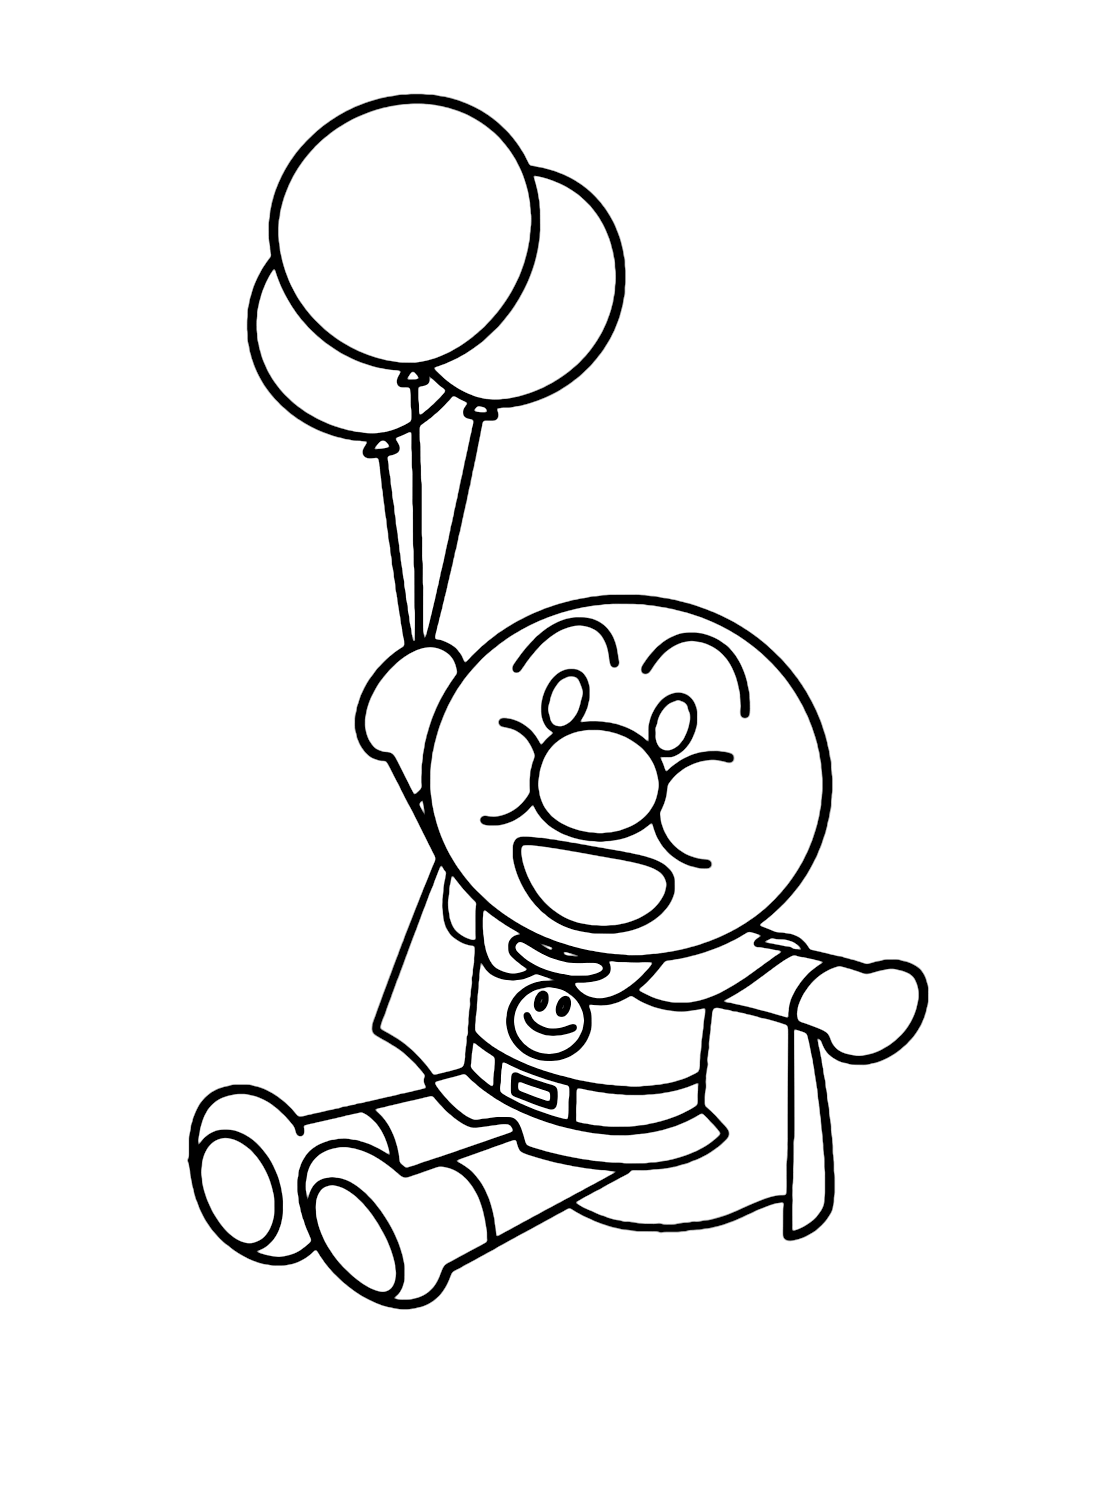 Balloons with Anpanman Coloring Pages